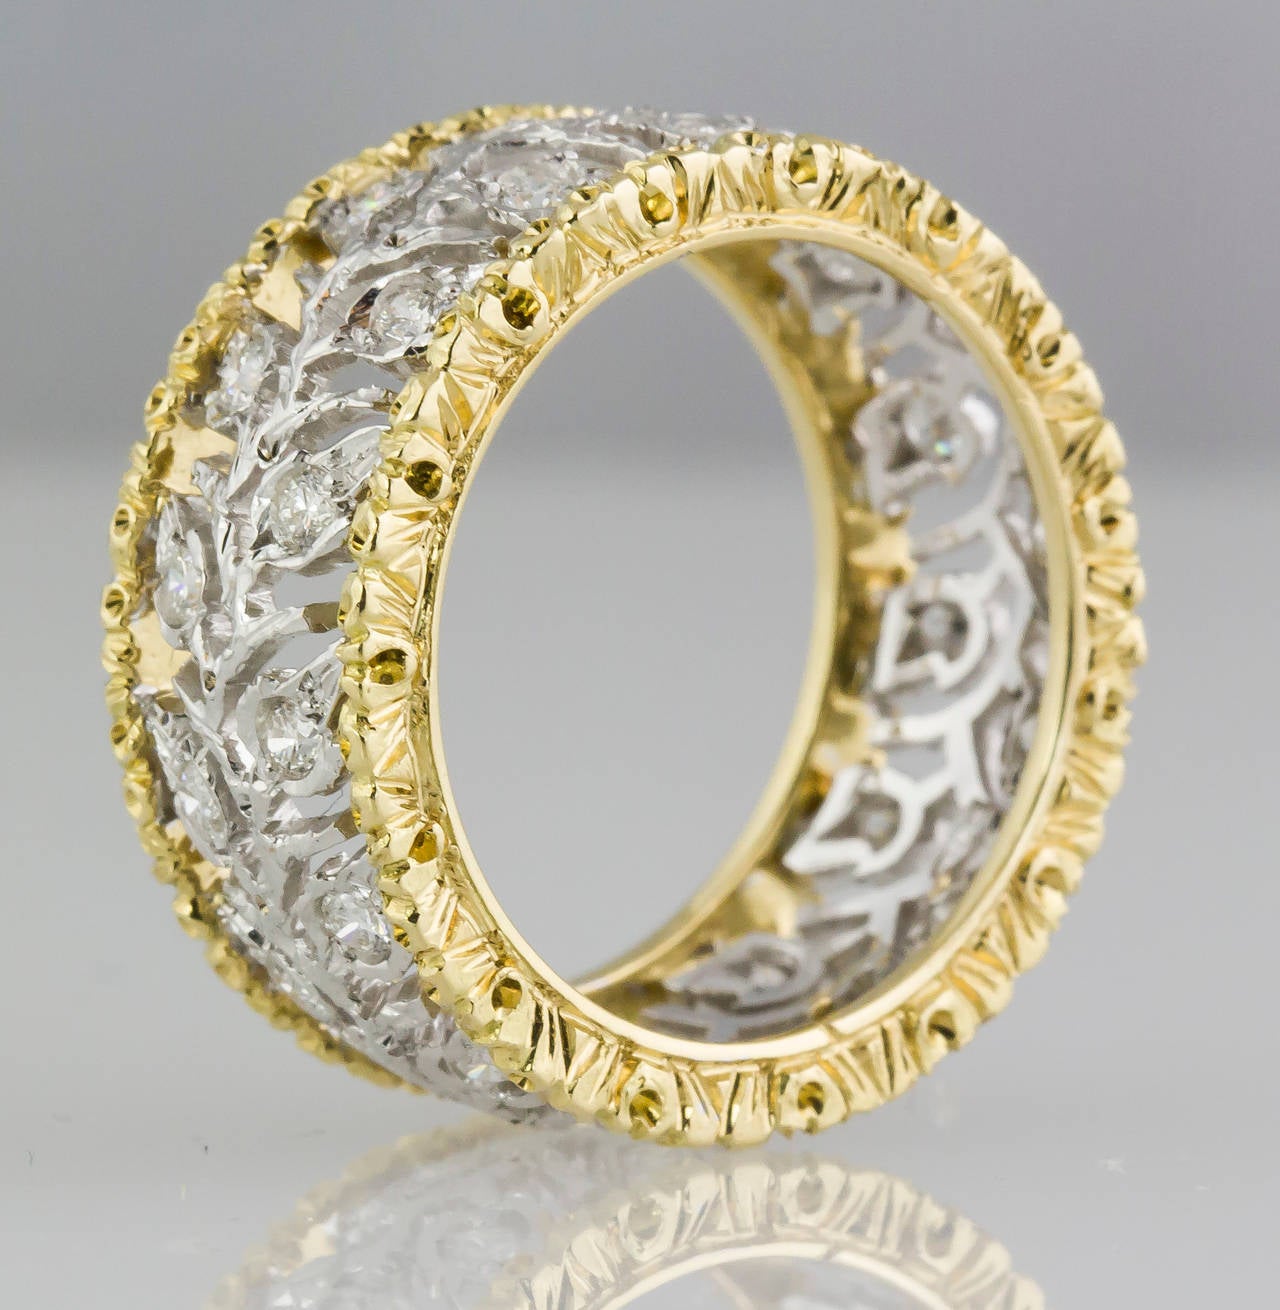 Fine  18K yellow and white gold diamond band ring by Mario Buccellati. It features a leaf motif with high grade round brilliant cut diamonds of approx. 1.00 cts. Size 6.5.  

Hallmarks: M. Buccellati, Italy, 750, Italian standard marks.